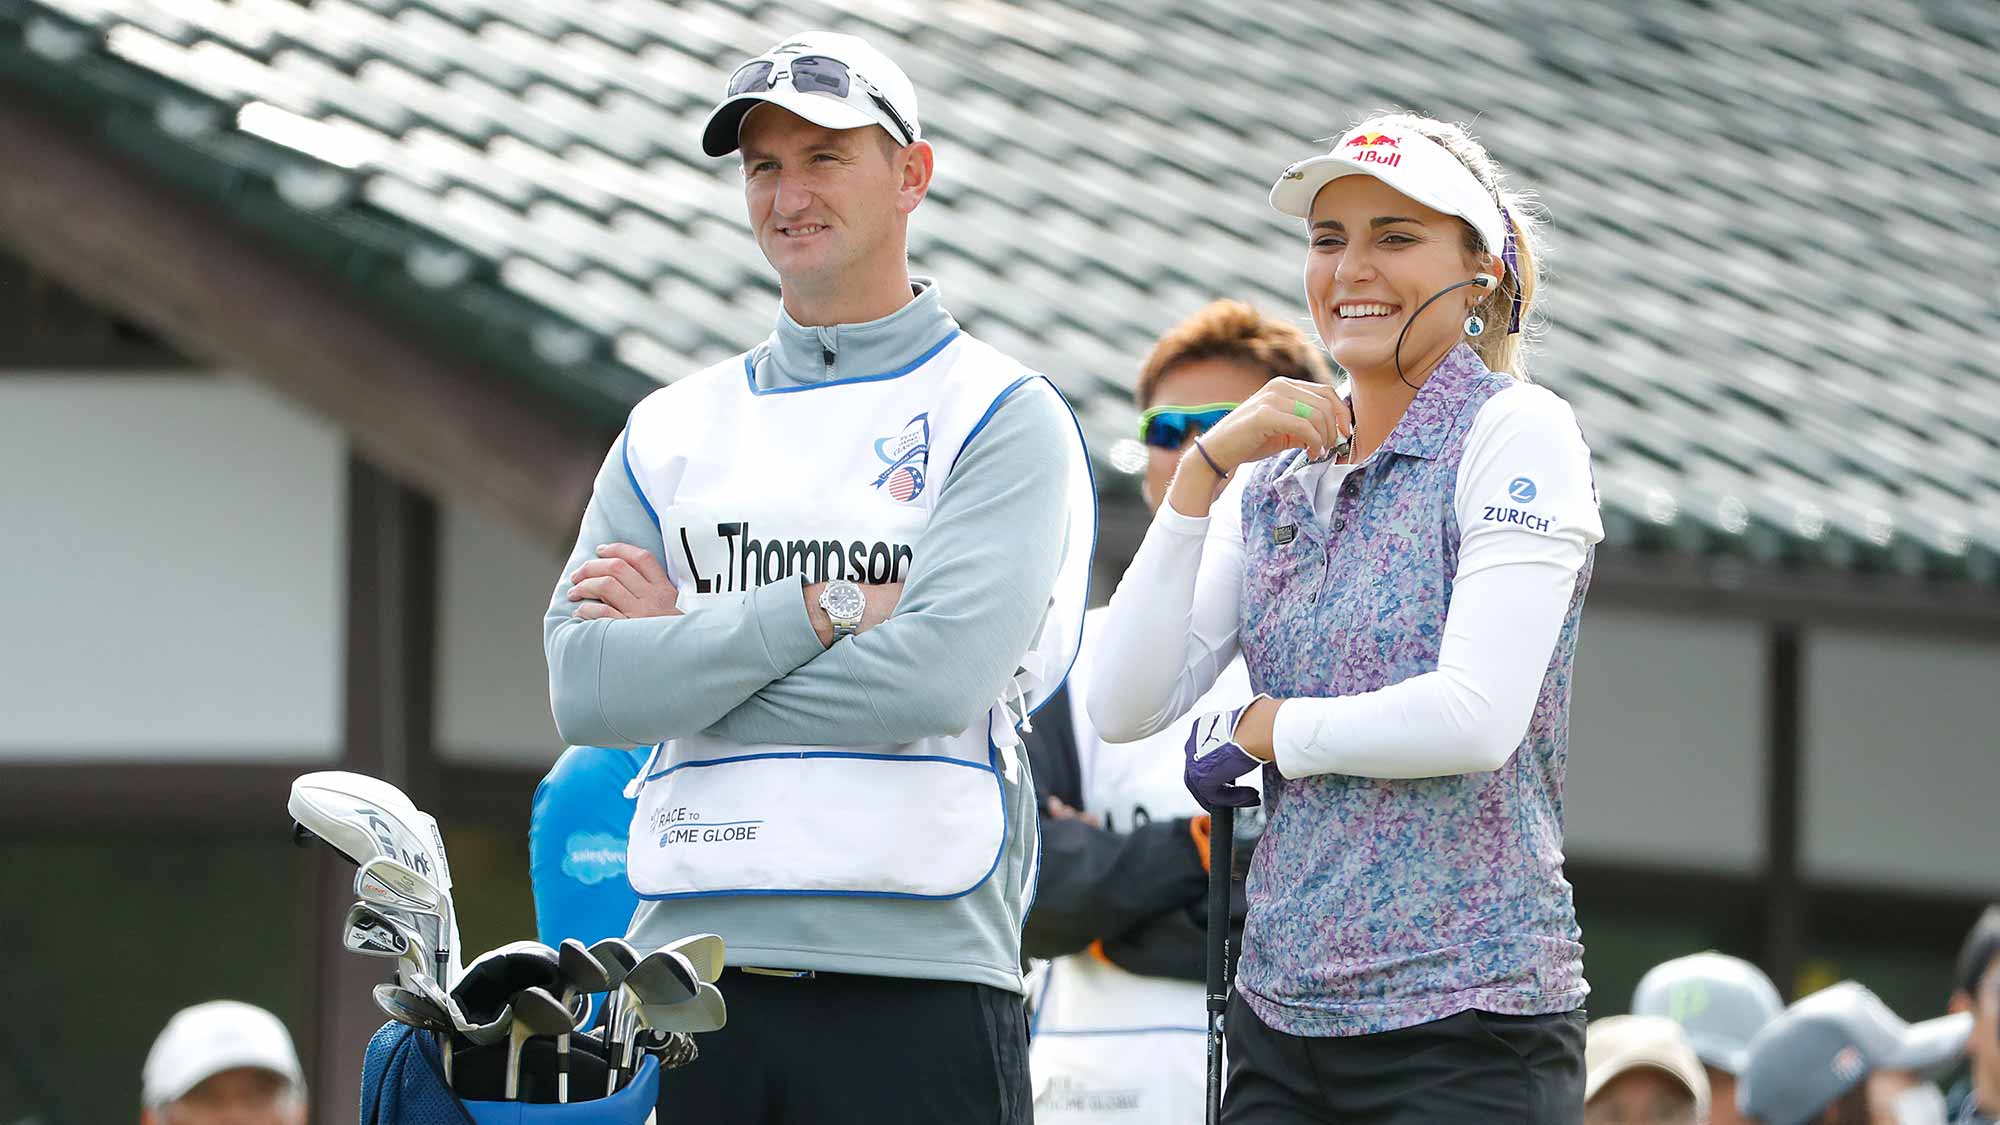 Lexi Thompson of United States watches on the first hole during the first round of the TOTO Japan Classic at Seta Golf Course on November 02, 2018 in Otsu, Shiga, Japan